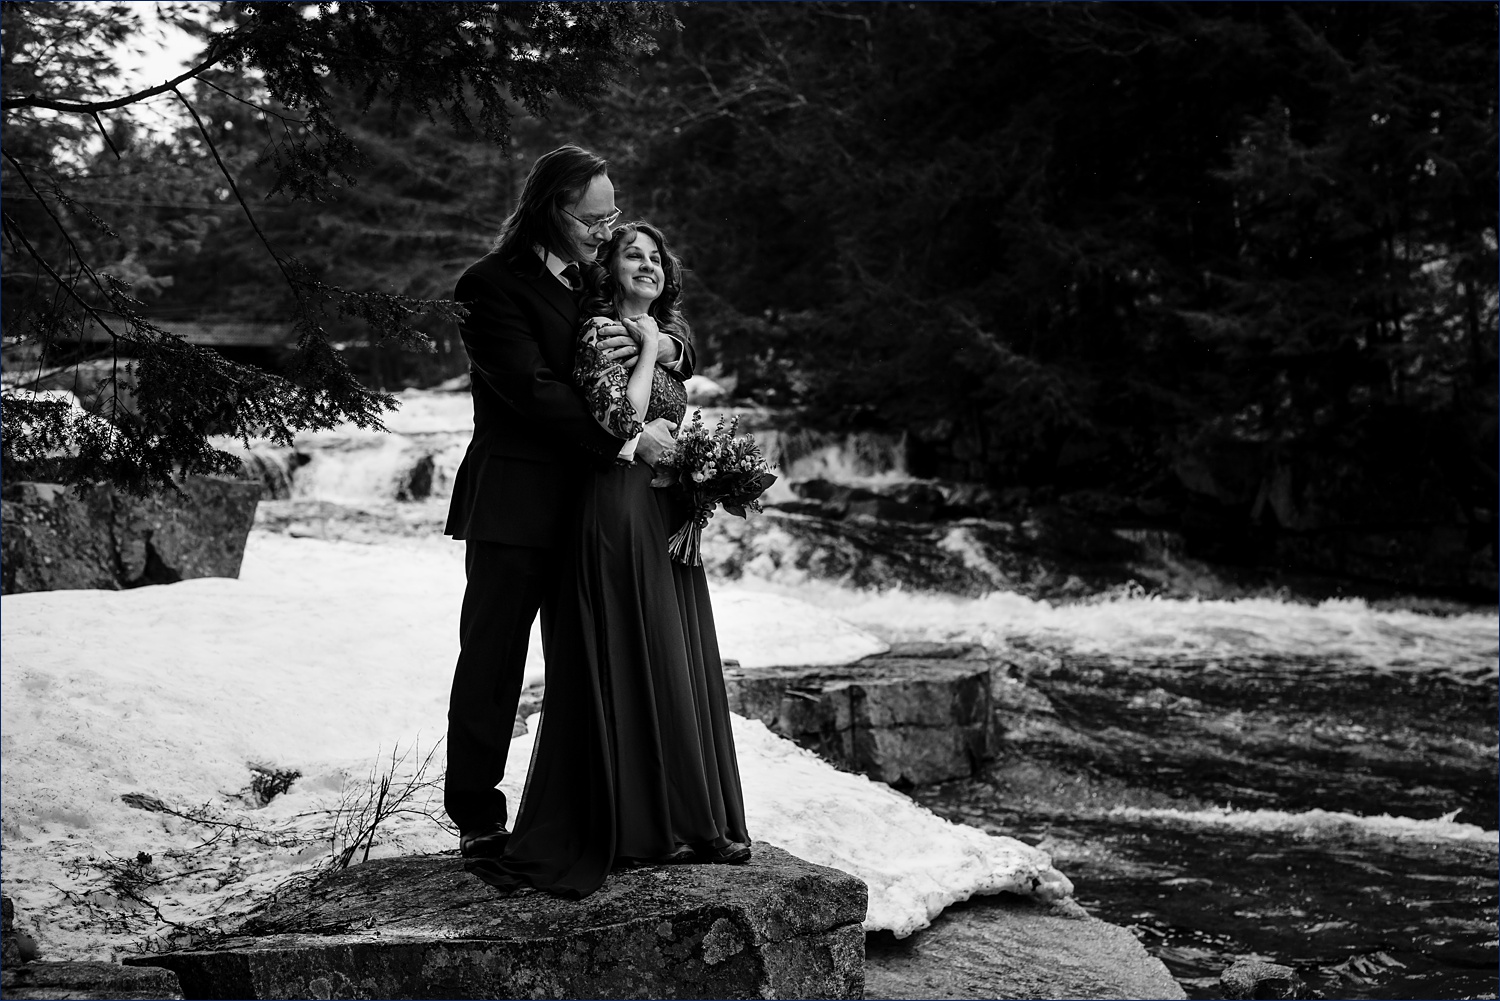 The newlyweds hold on tight to one another in front of Jackson Falls in the Spring chill air after their NH Elopement